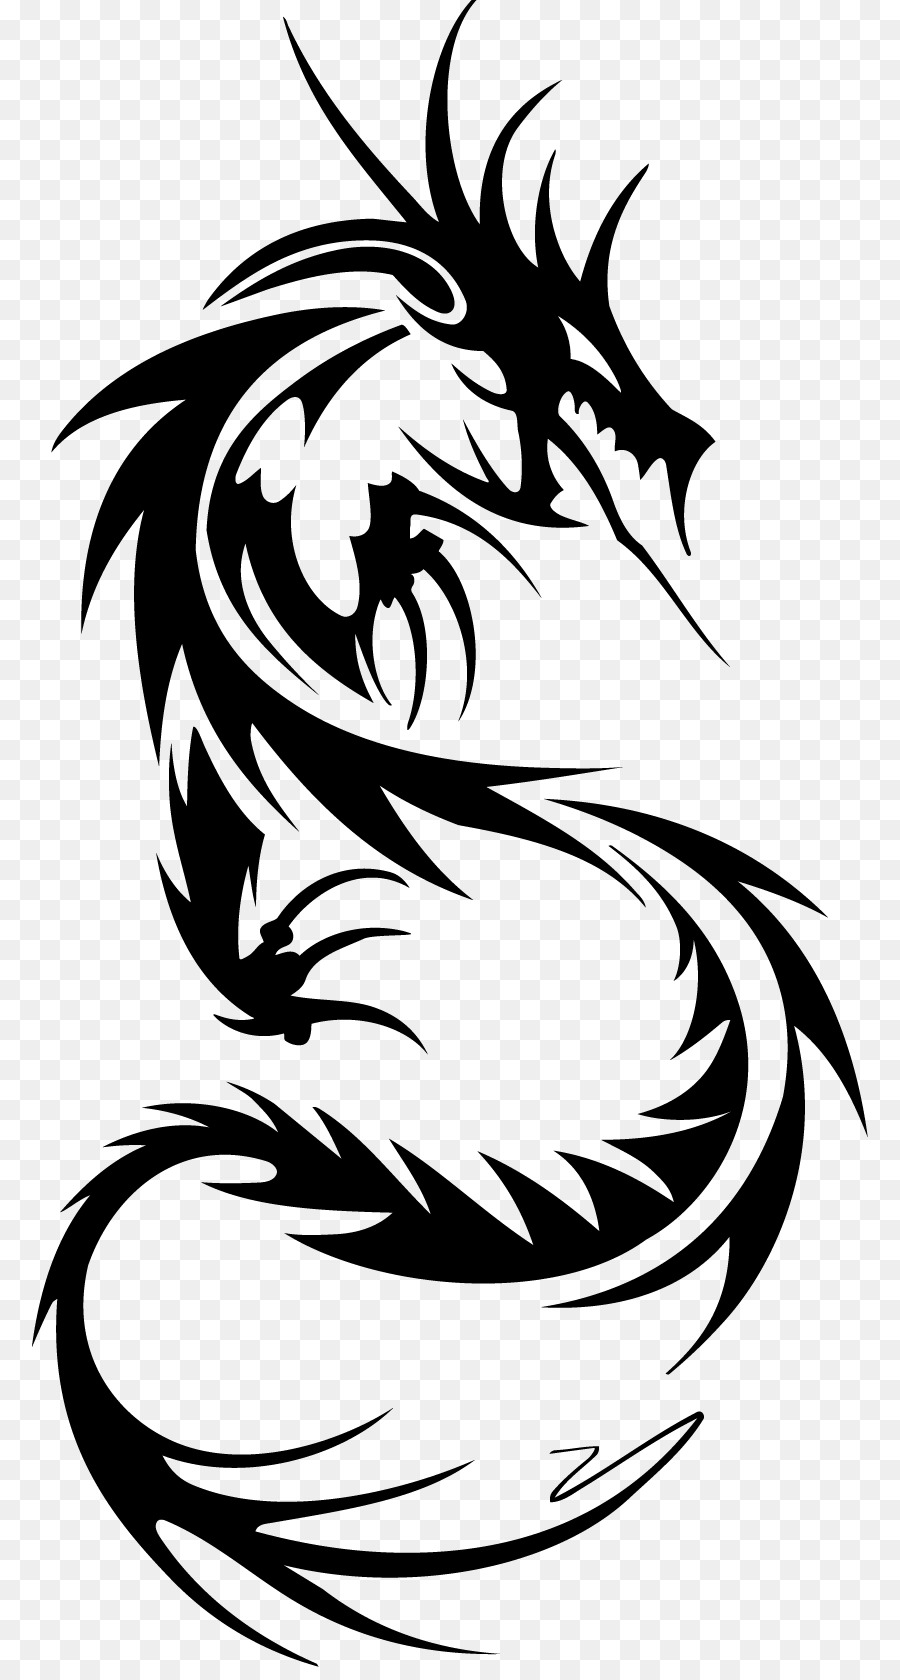 Sleeve tattoo Tribe Nautical star Dragon - Dragon png download - 836*1667 - Free Transparent Tattoo png Download.